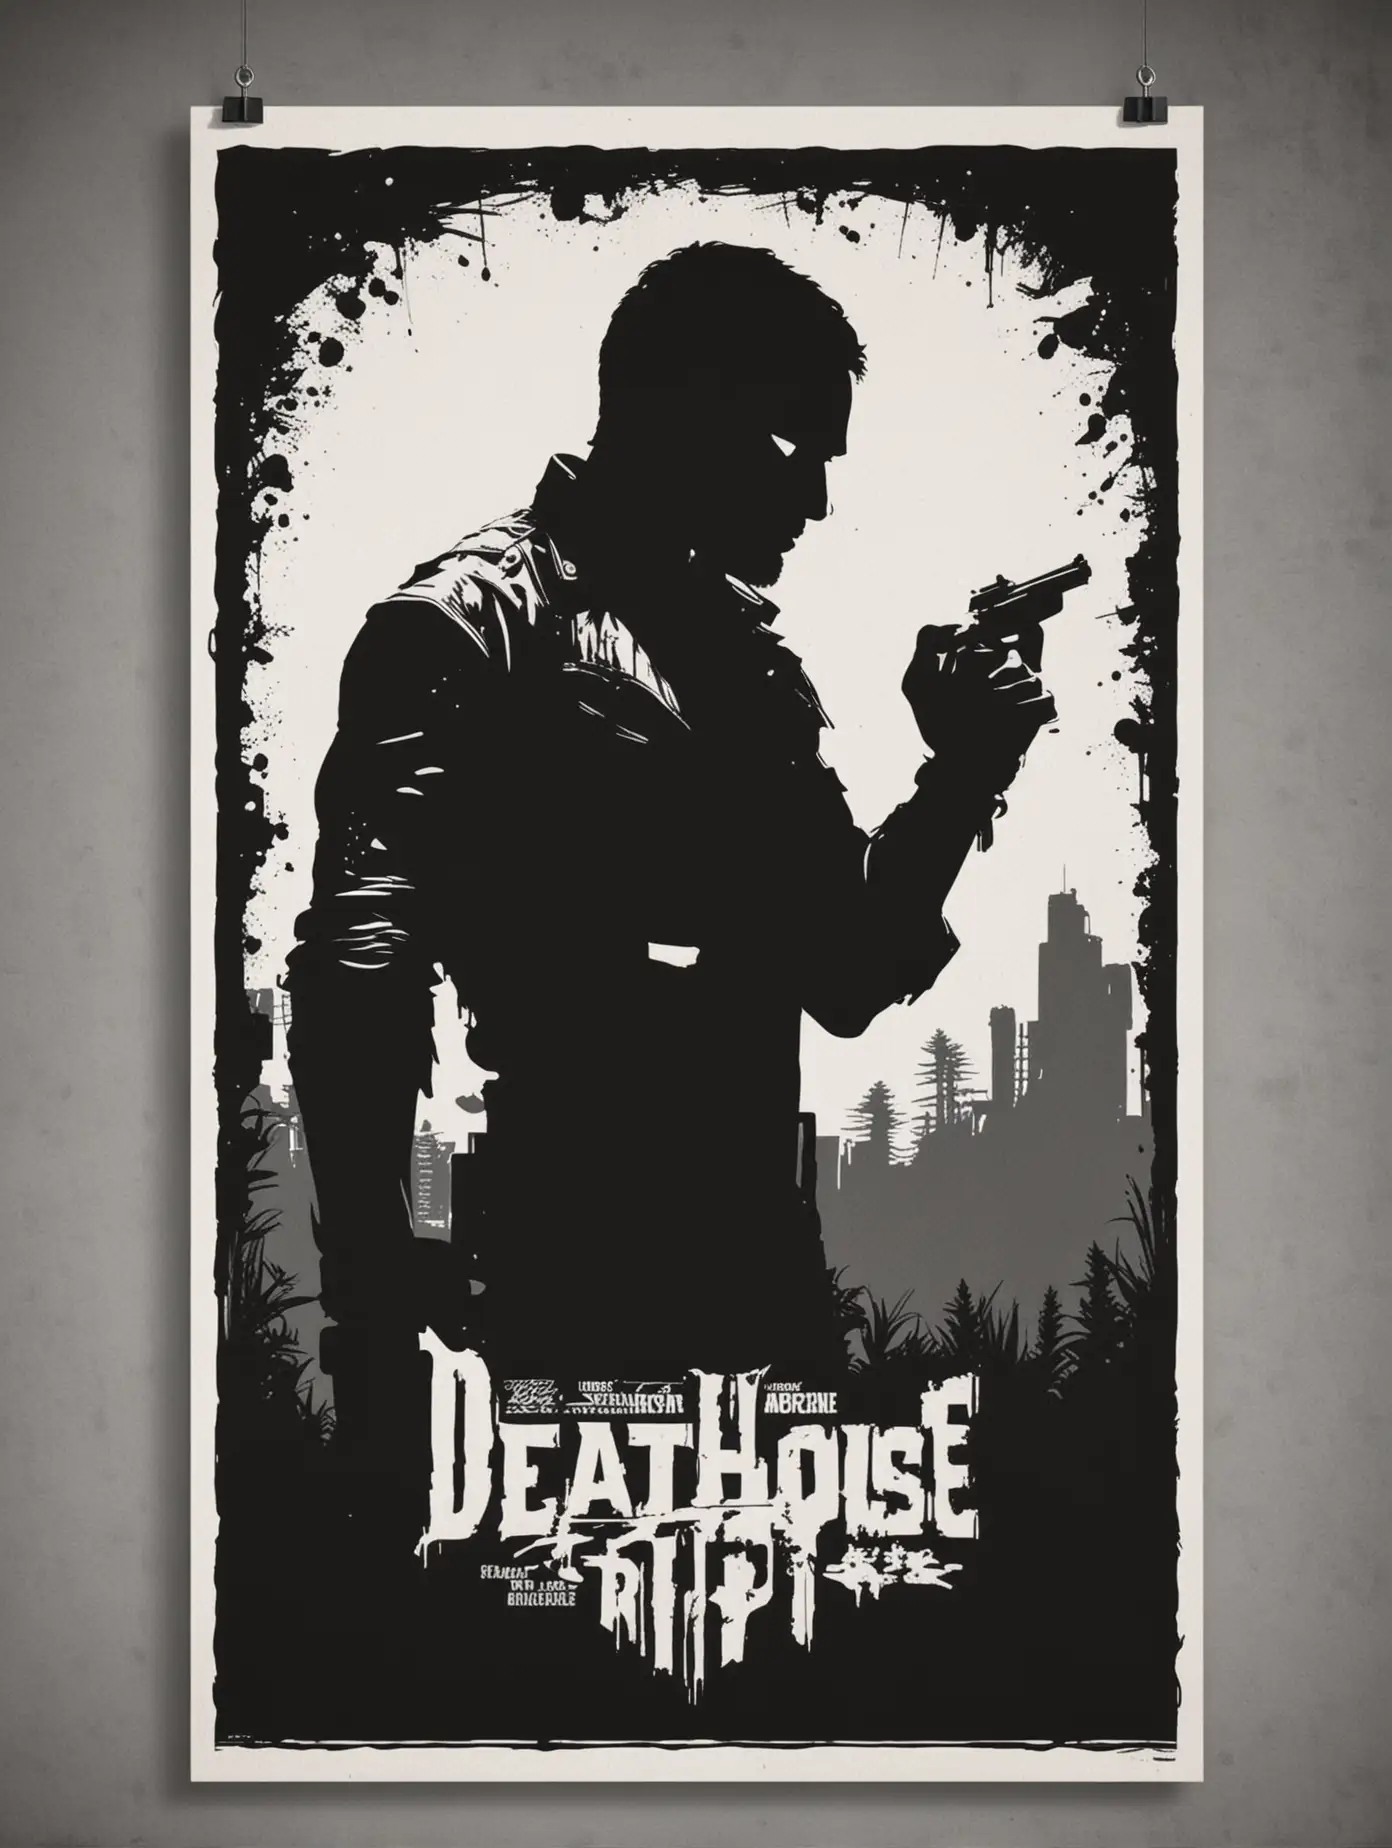 stencil, minimalist, simple, vector art, black and white, silhouette, negative space, grindhouse movie poster, death grip